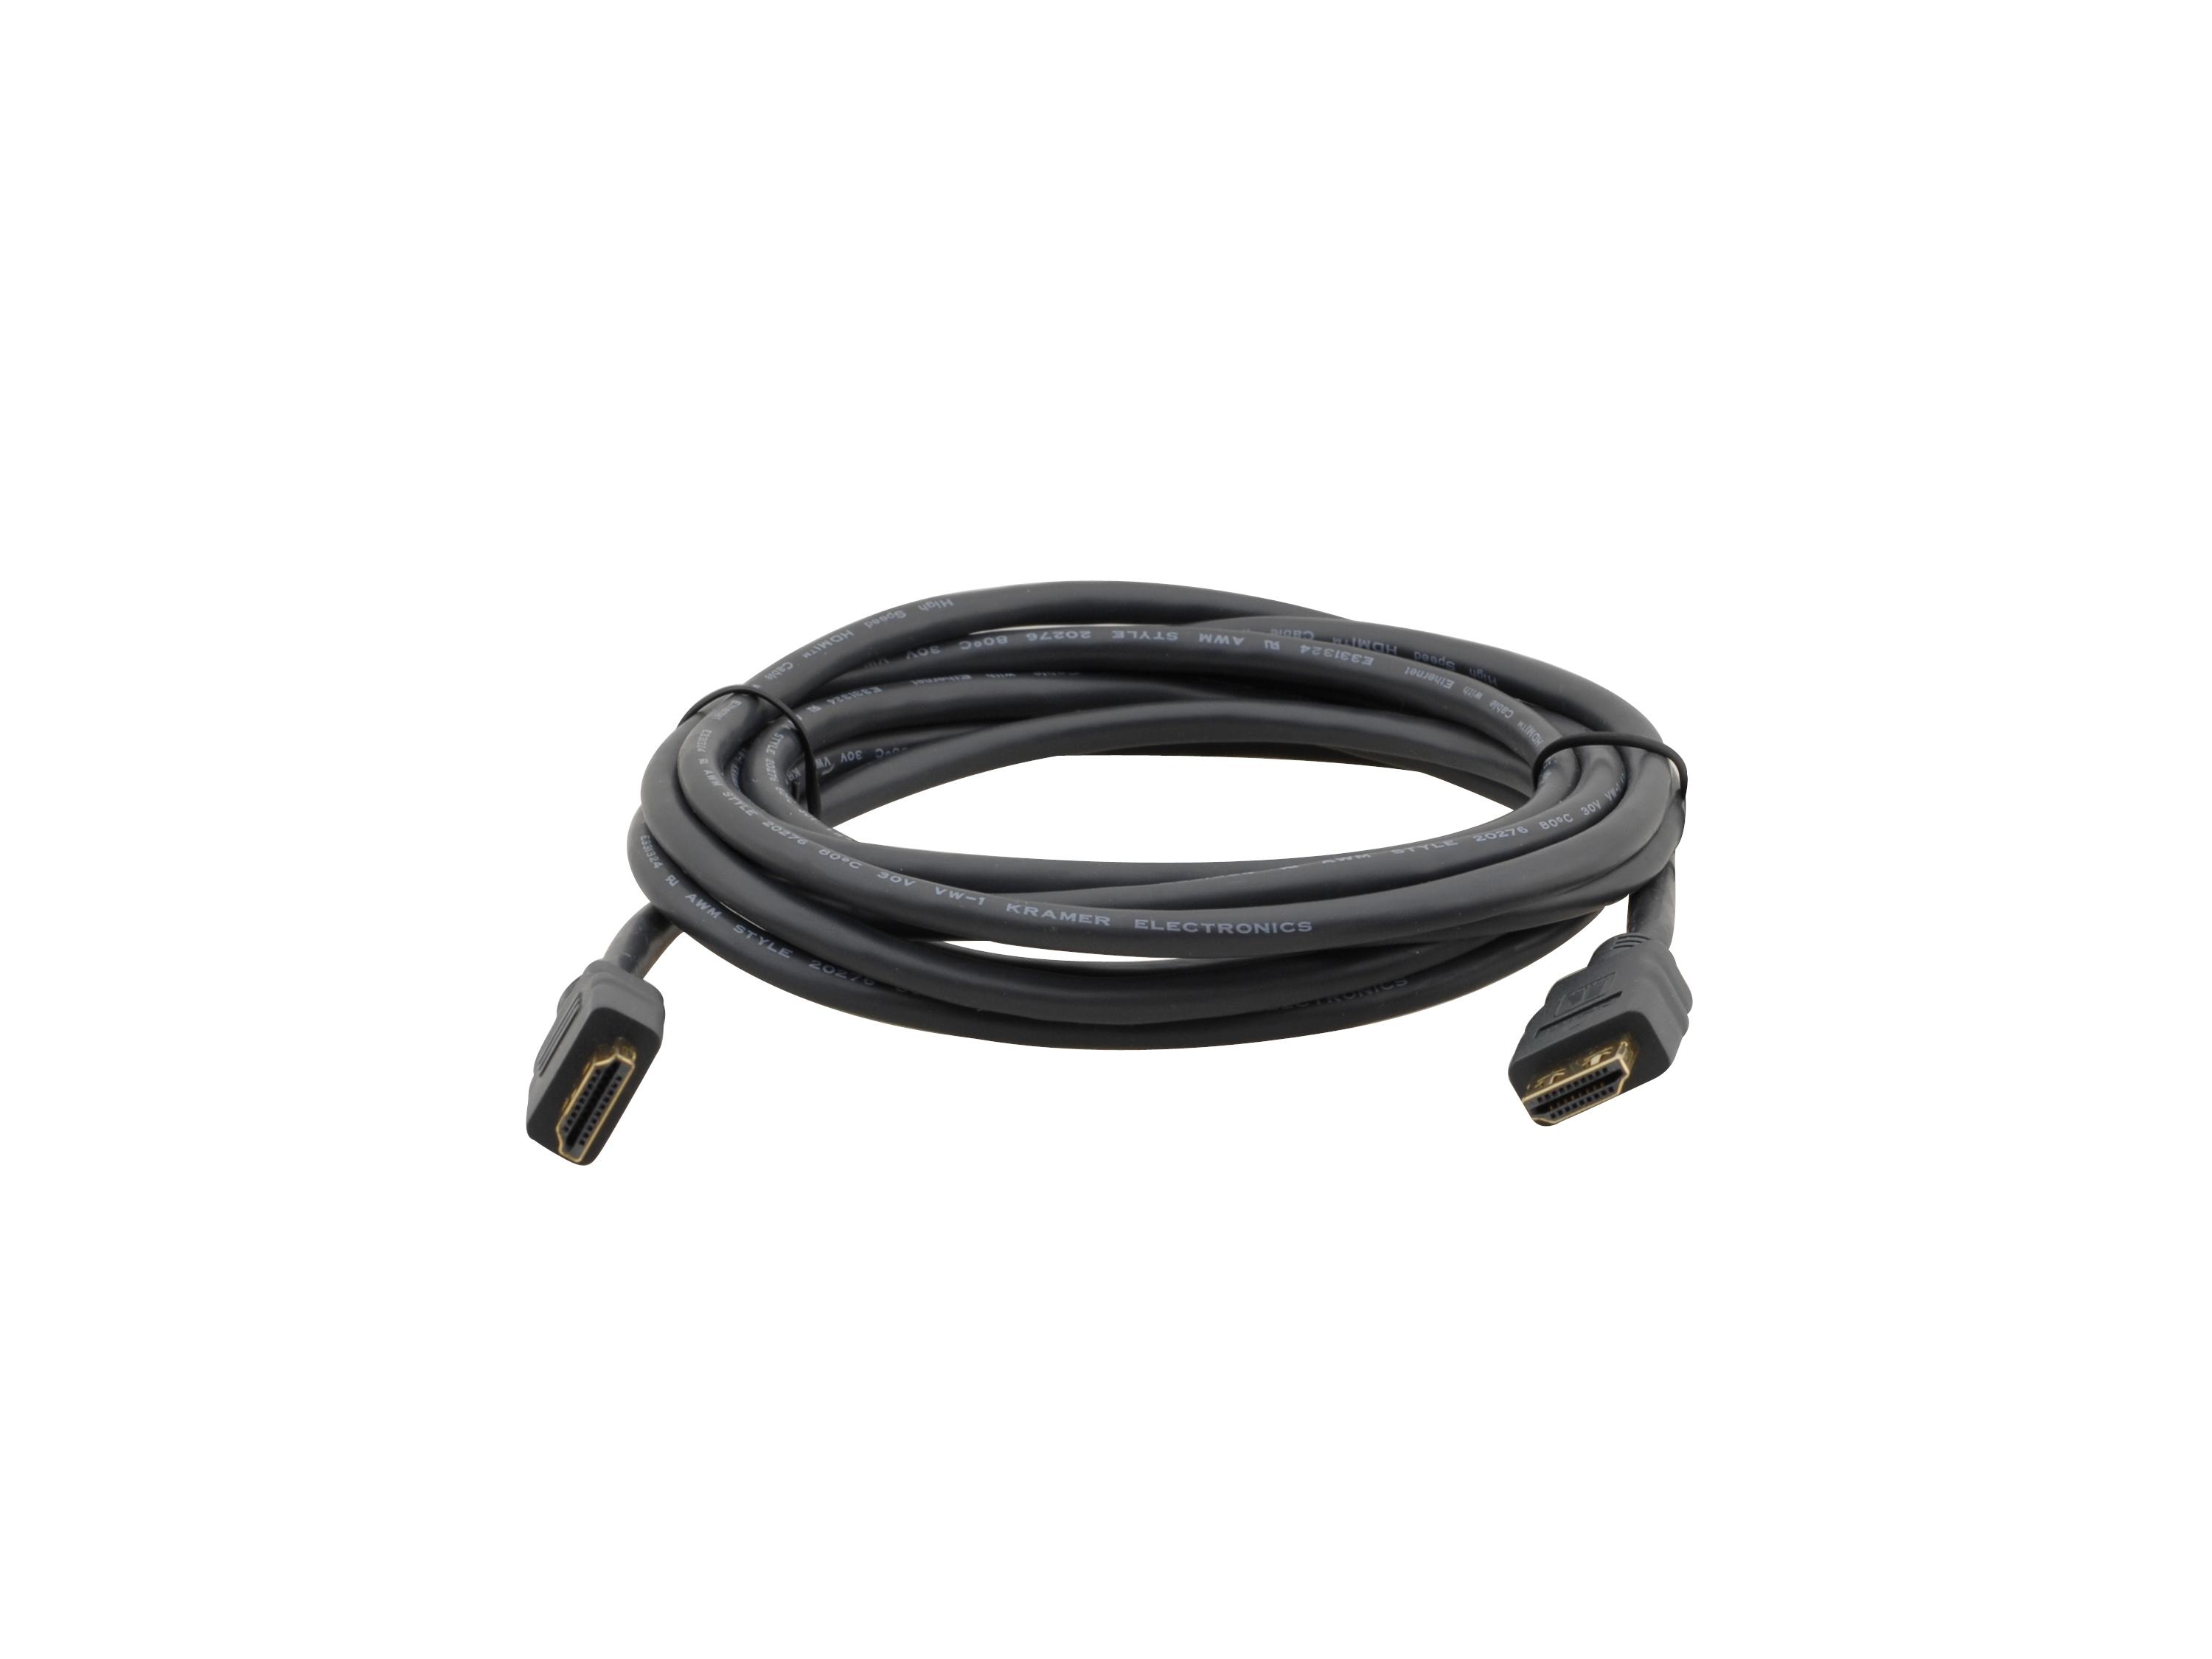 Kramer C-MHM/MHM-35 High-Speed HDMI Flexible Cable with Ethernet 35ft